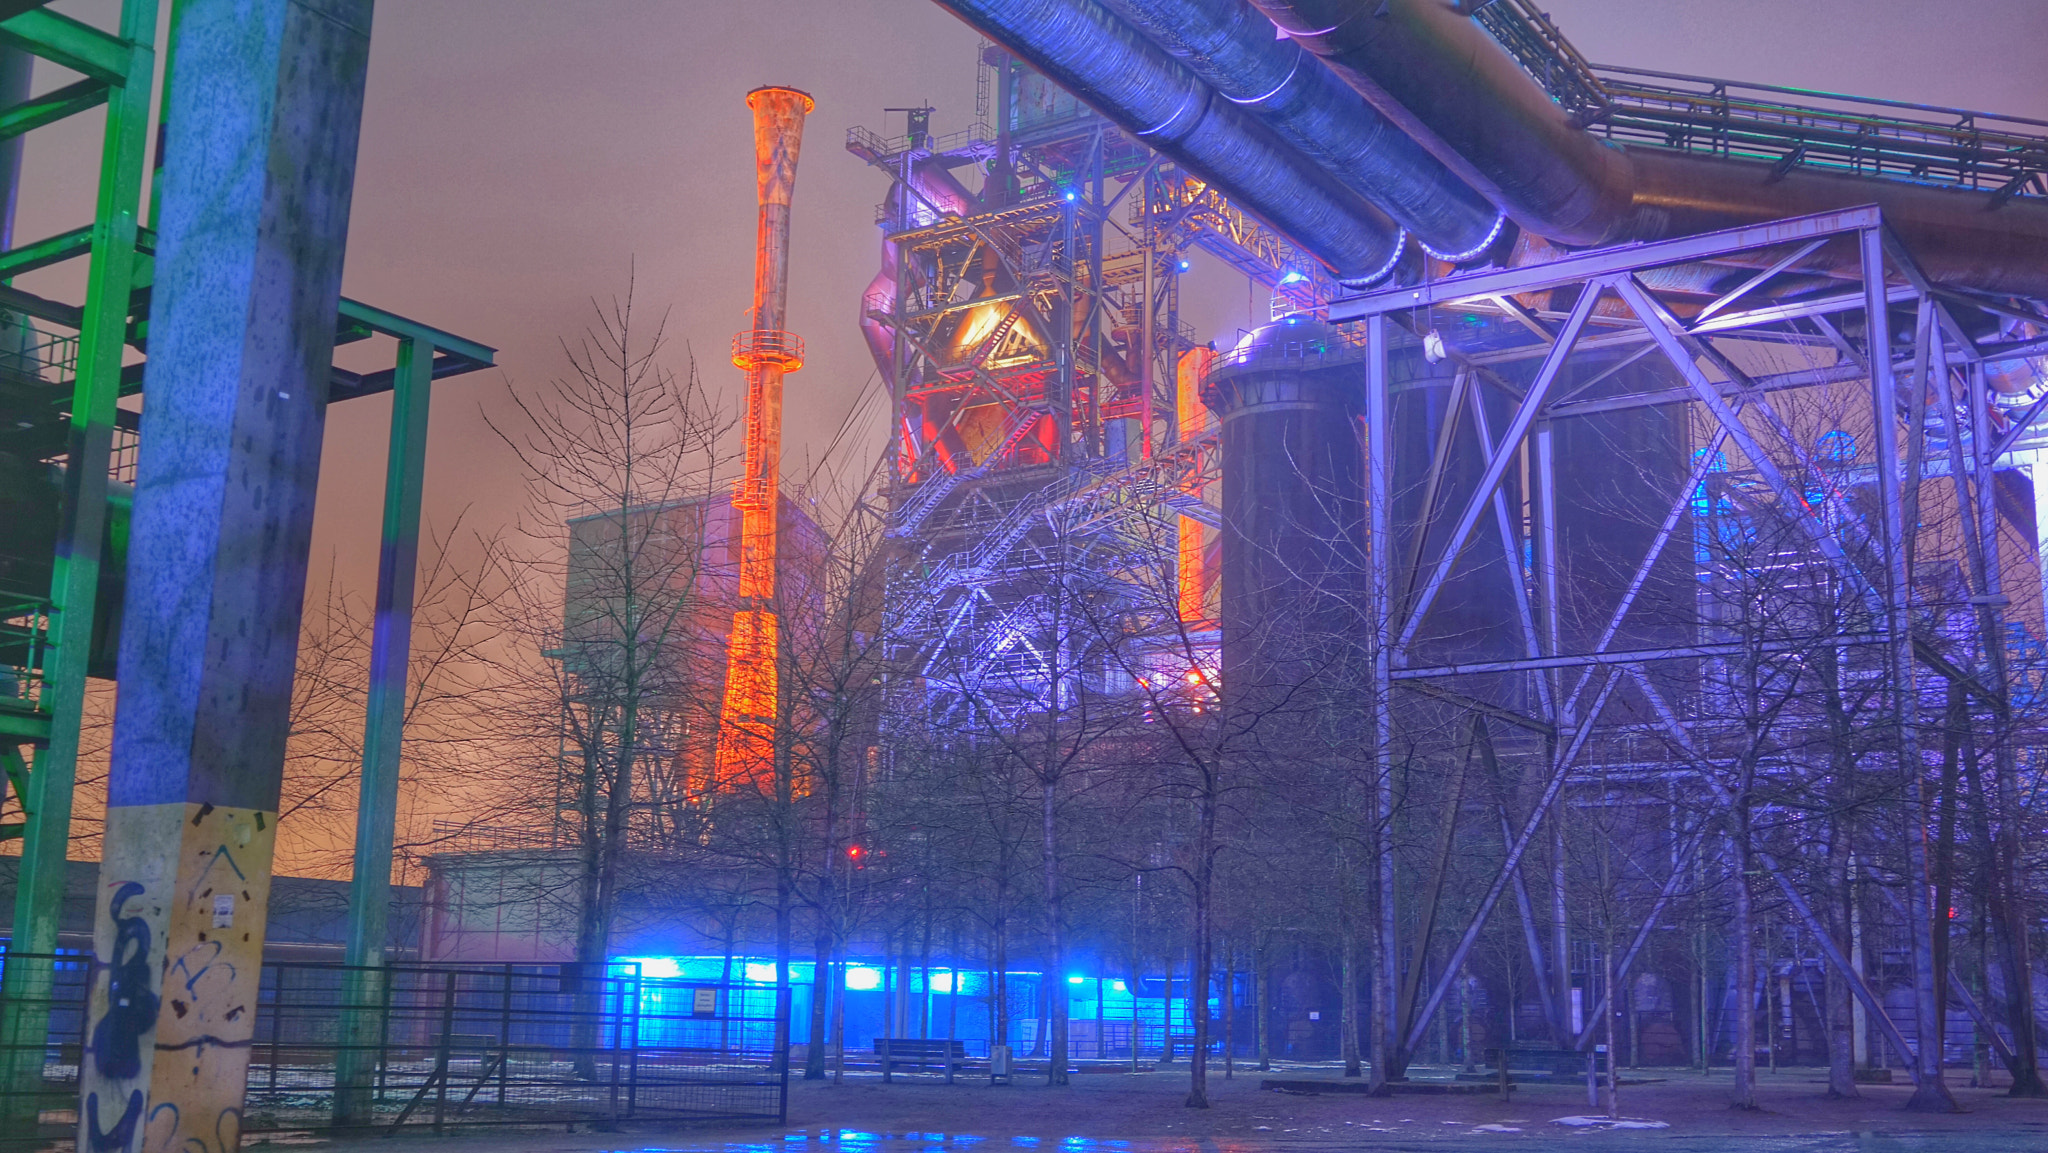 Sony a7R sample photo. Landschaftspark nord in duisburg photography